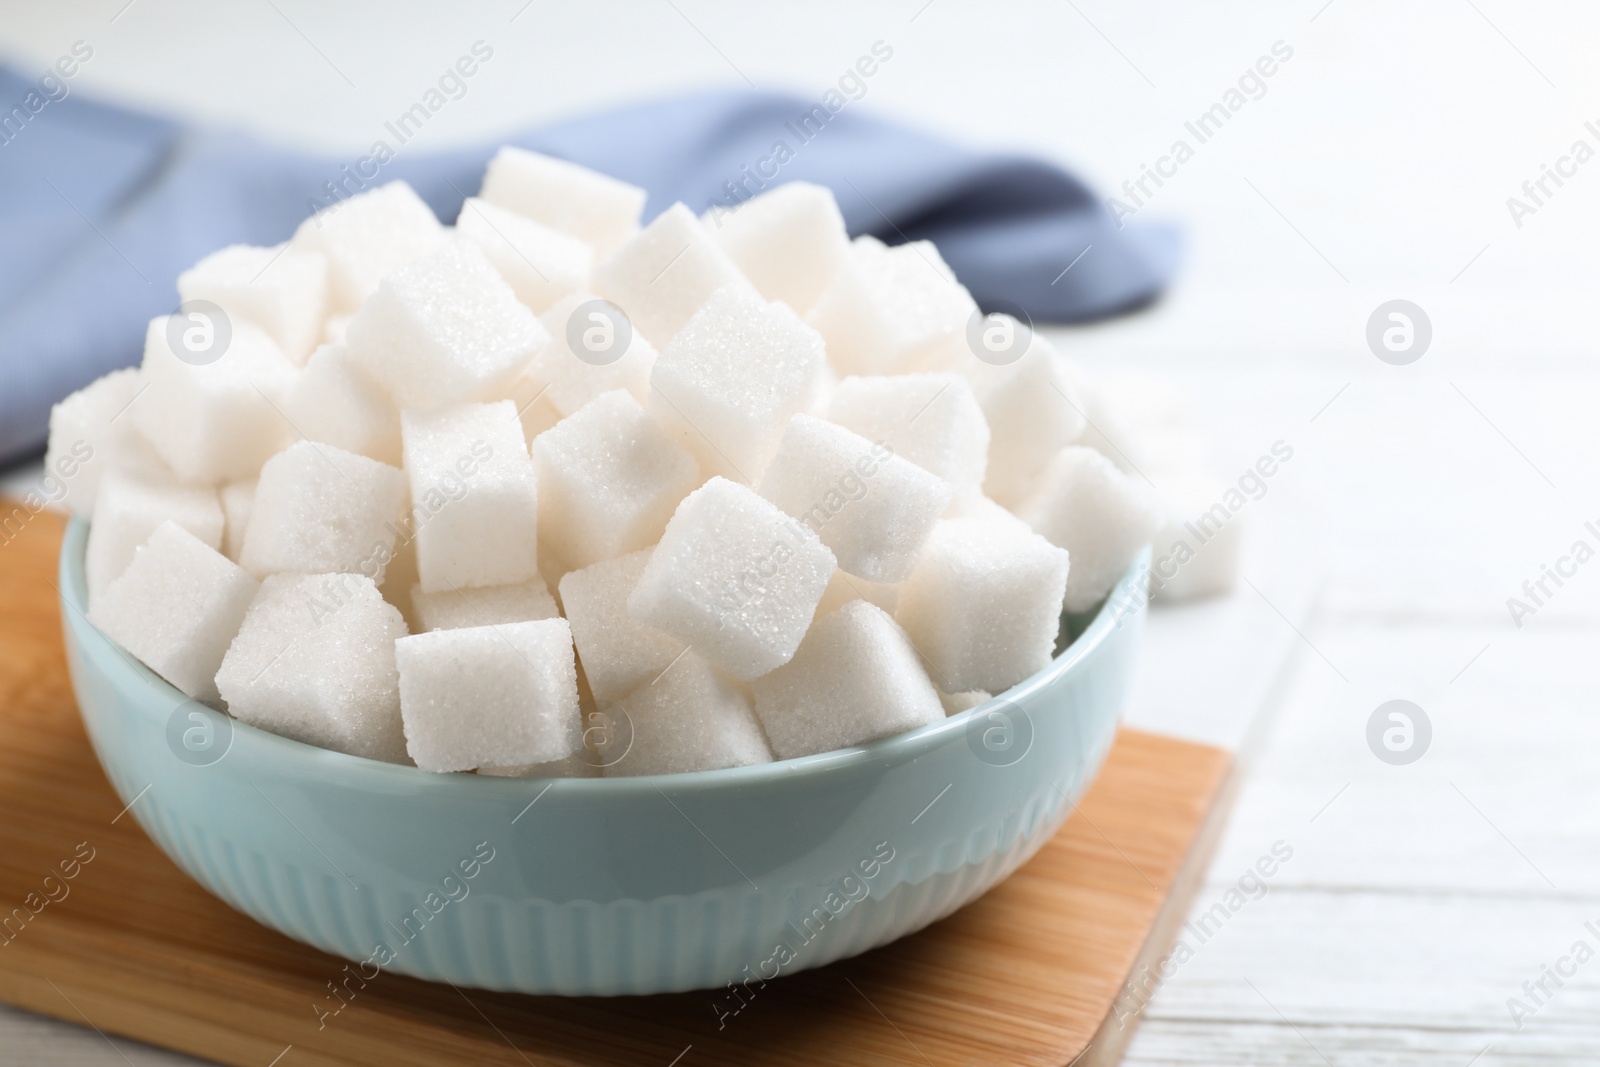 Photo of Refined sugar cubes on white wooden table